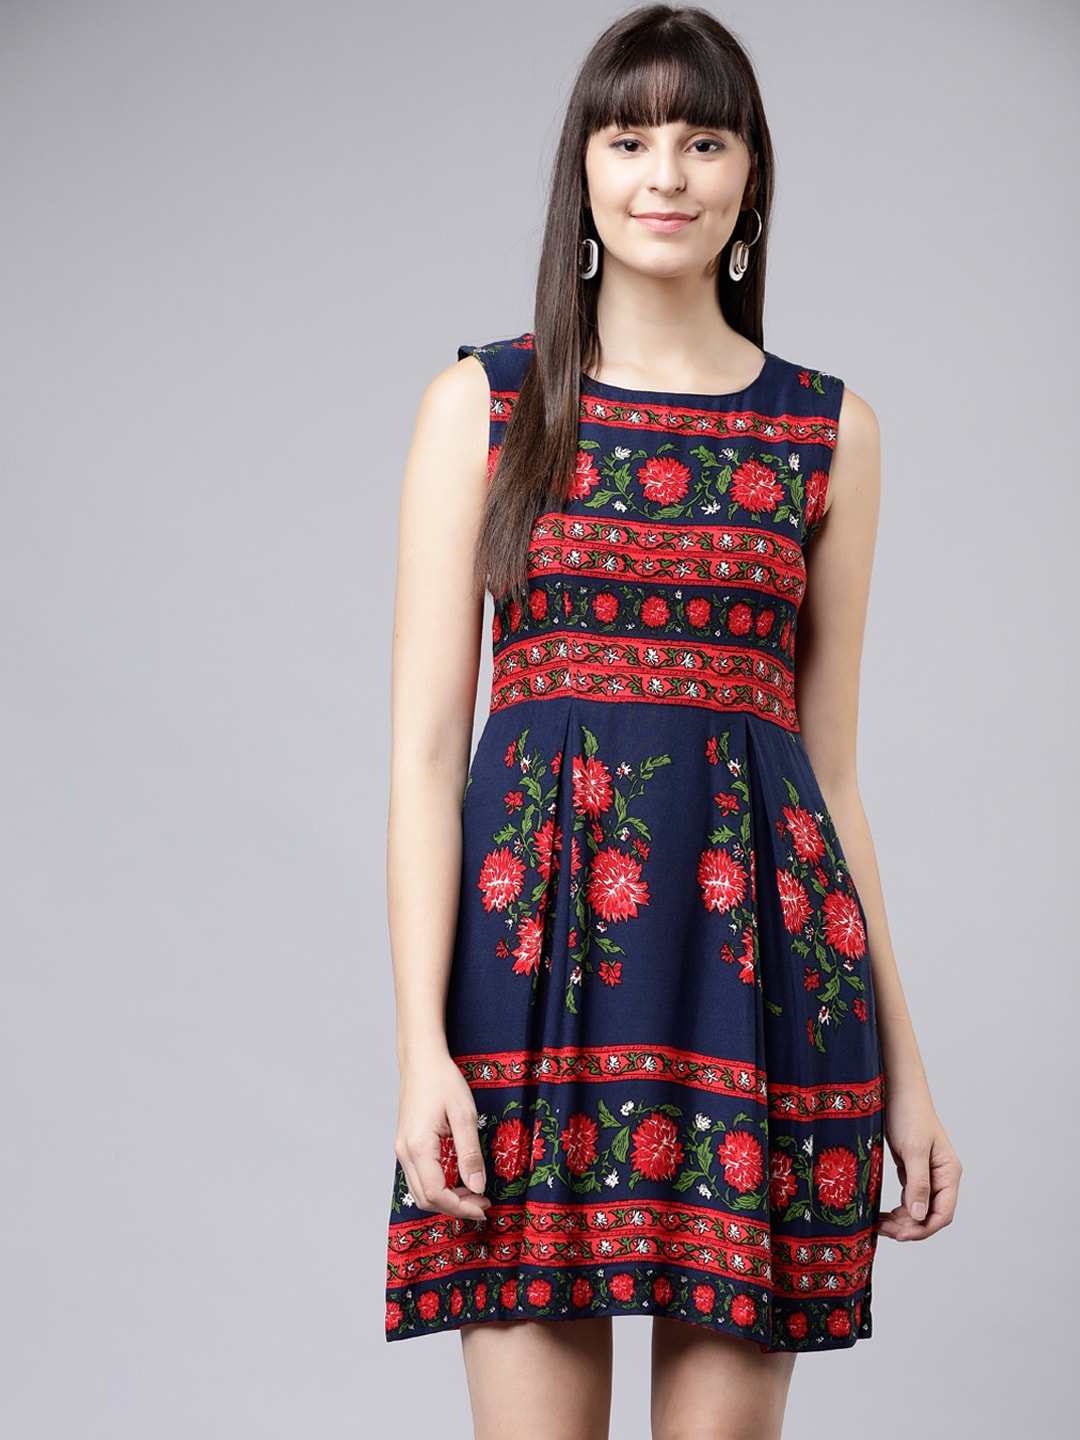 Tokyo Talkies Women Navy Blue Floral Printed Fit and Flare Dress